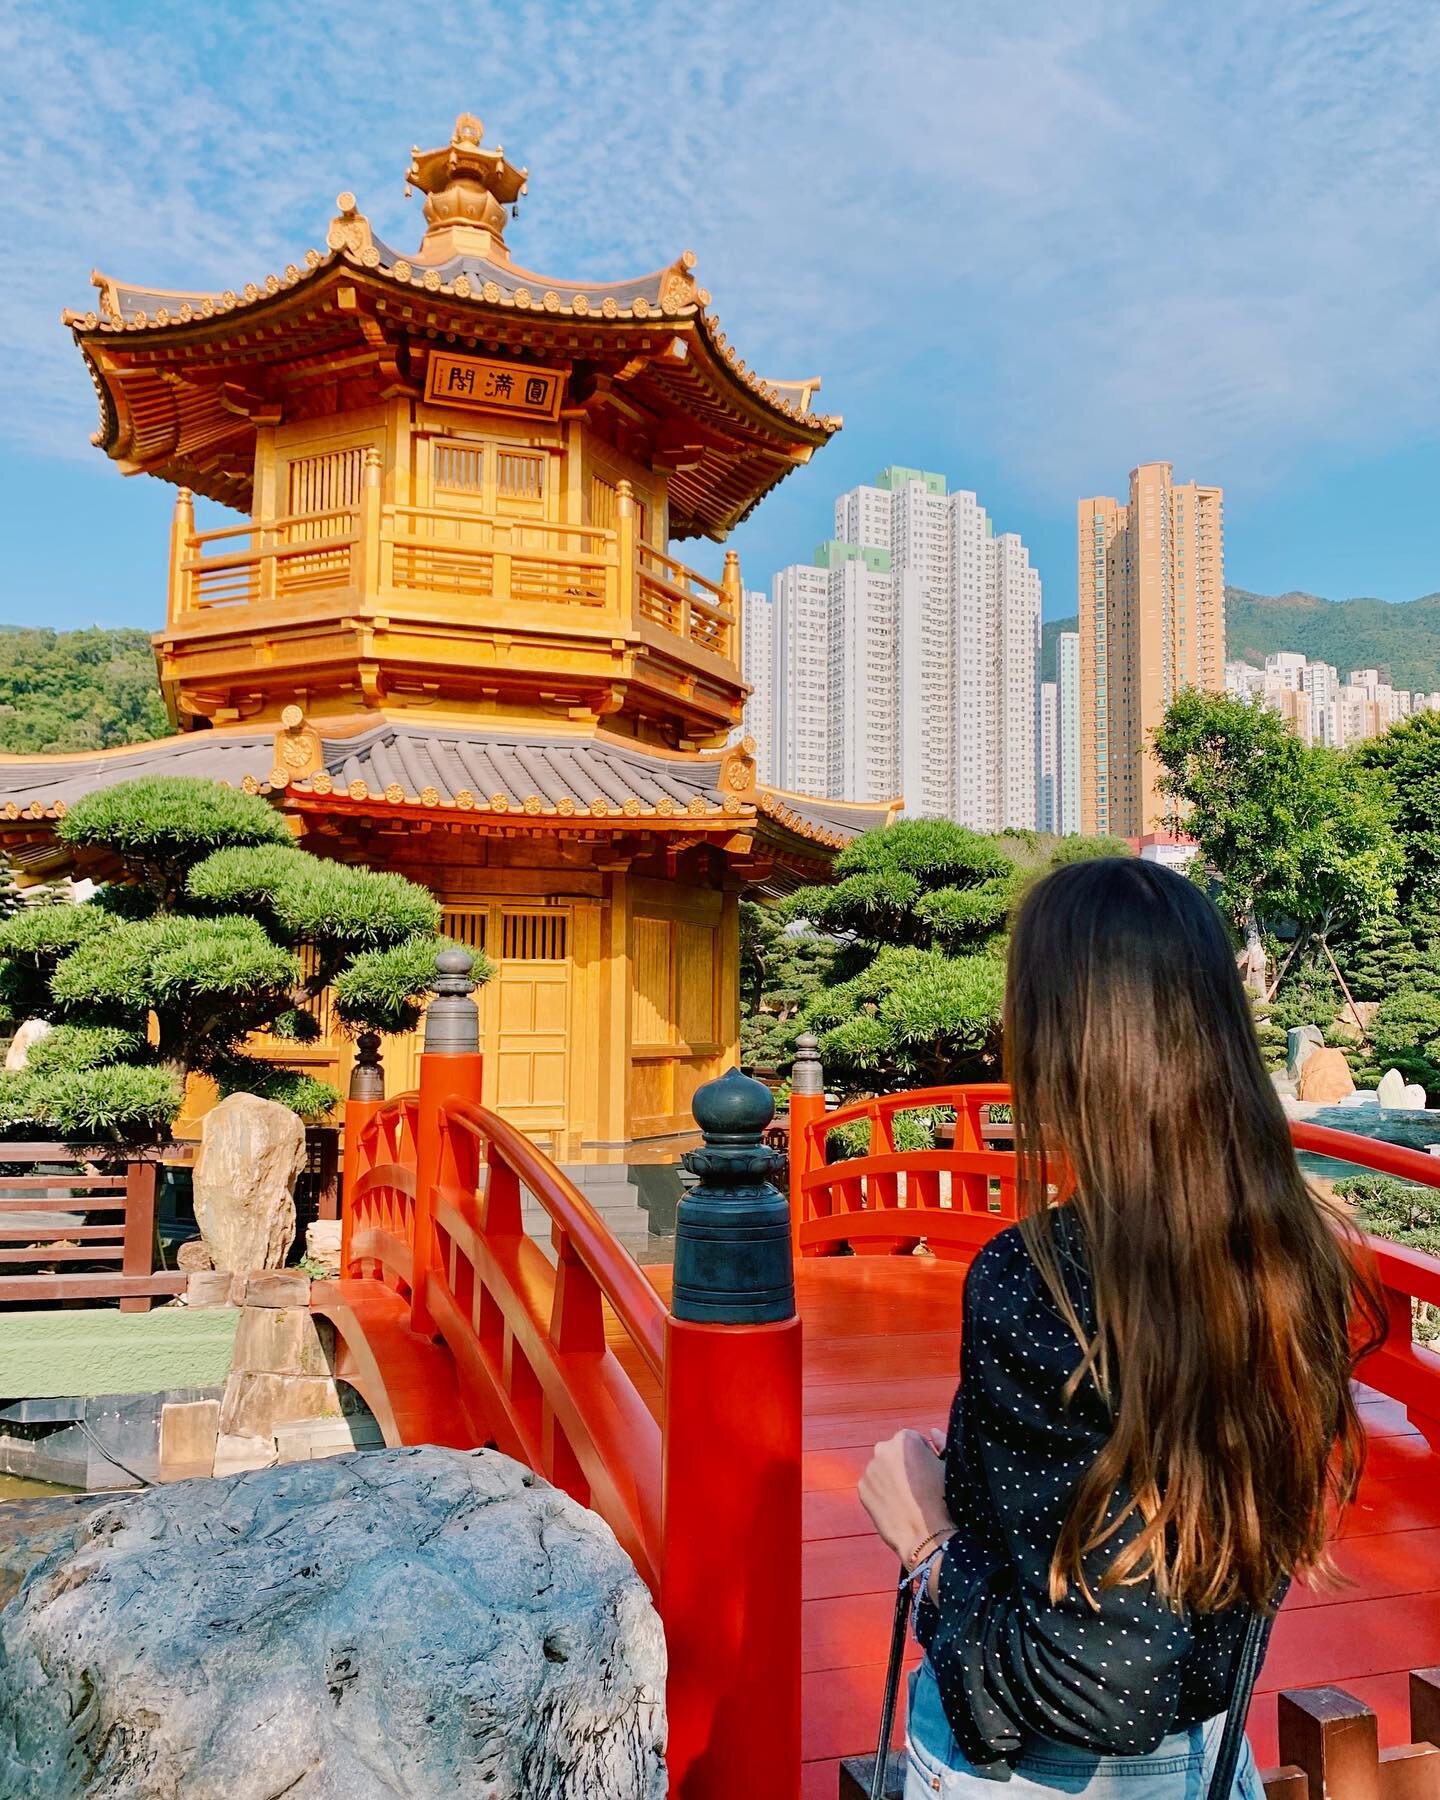 Founded in 1934 as a retreat for Buddhist nuns, Chi Lin Nunnery is an oasis of beauty in Diamond Hill, Kowloon, Hong Kong. 

Featuring Tang Dynasty ancient architecture, bonsai gardens, and lotus ponds, this 355,200 square foot nunnery is a retreat f